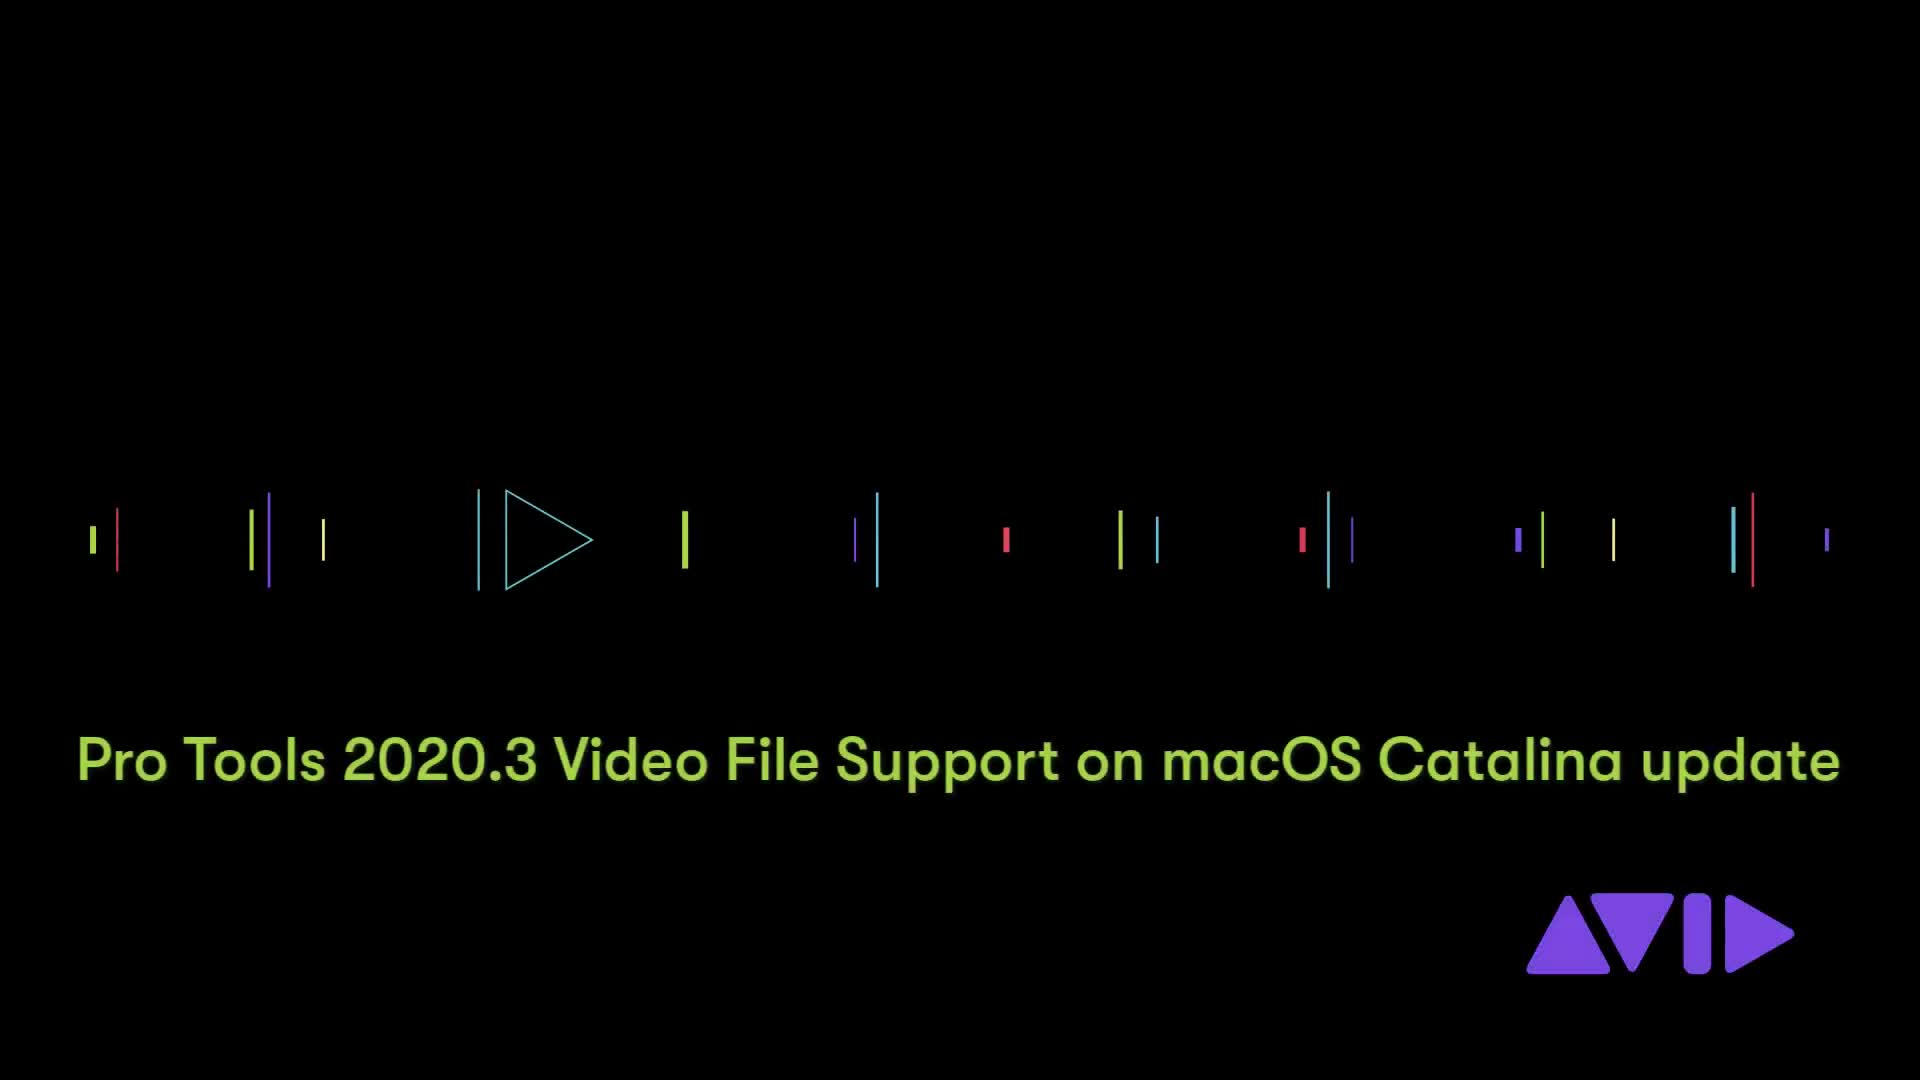 Pro Tools 2020.3 Video File Support on macOS Catalina Update